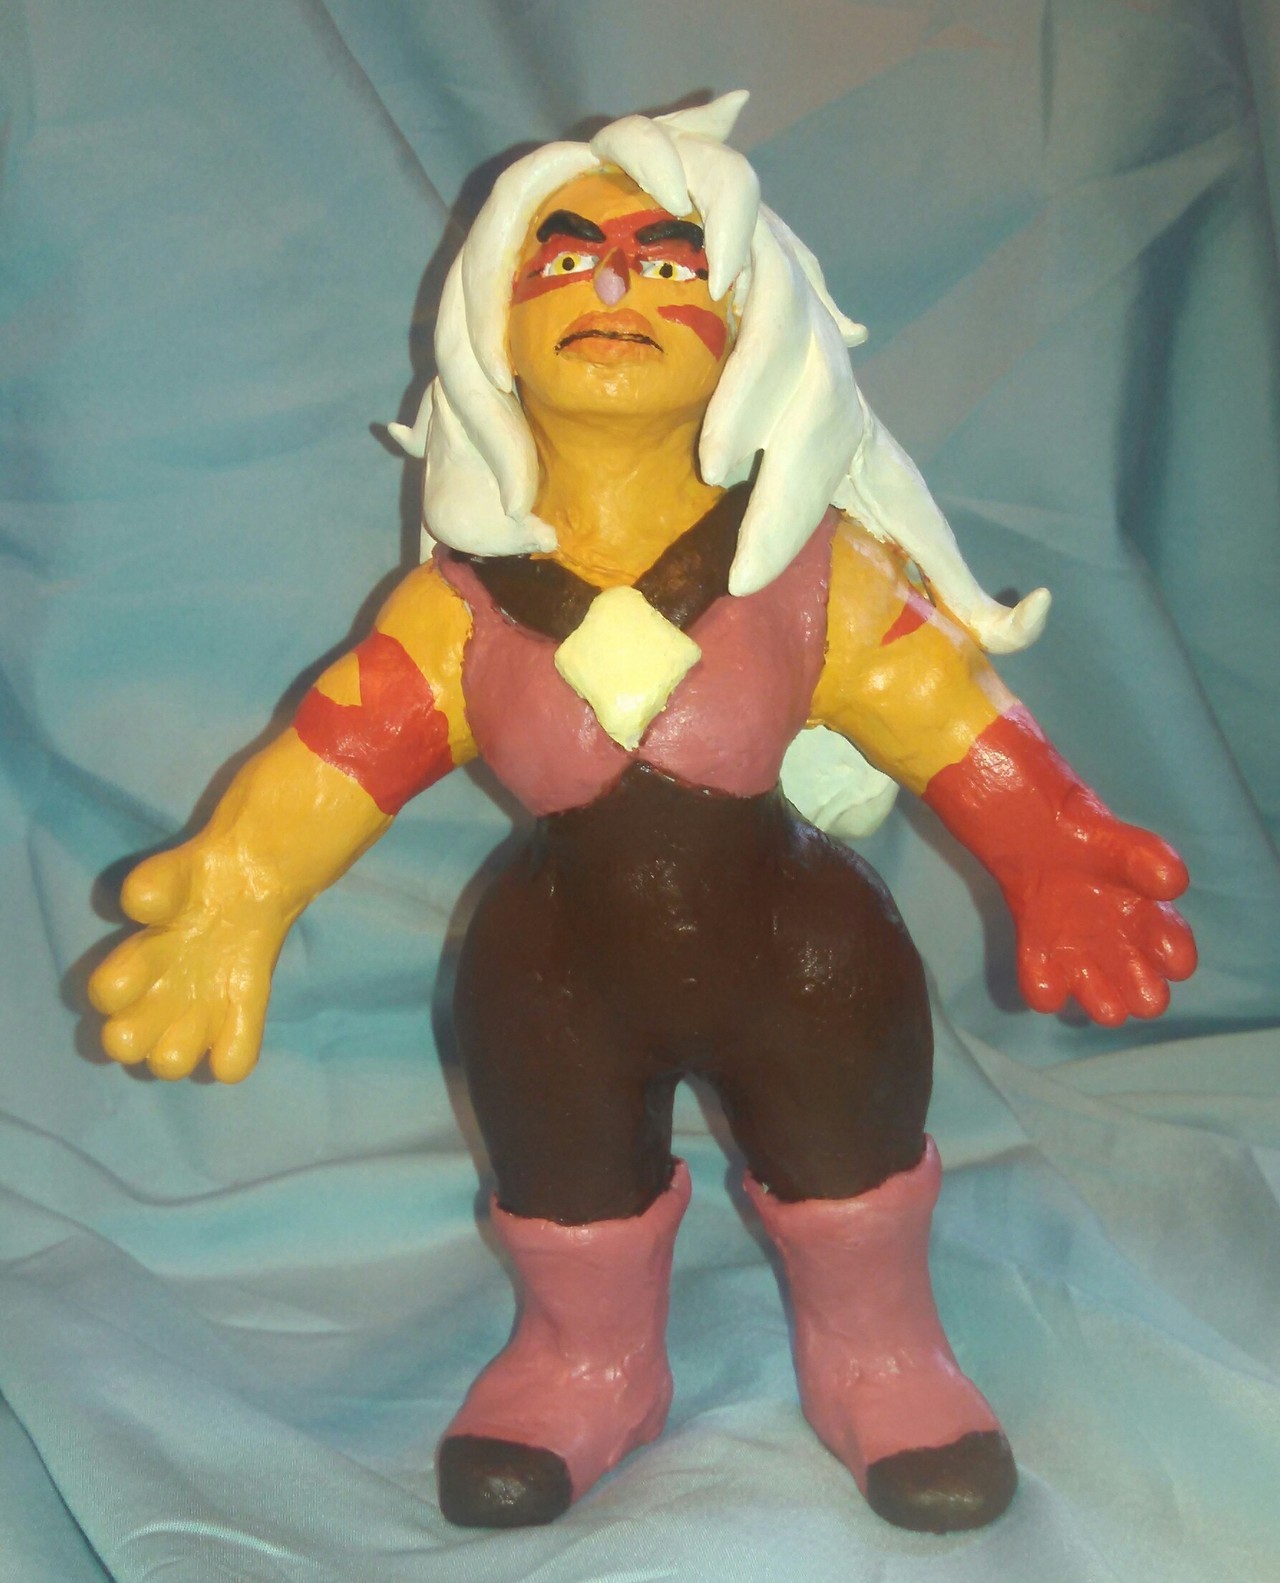 Jasper made of sculpey and painted with acrylic paint. I figured since I couldn’t find any jasper figurines in stores I’d make my own.